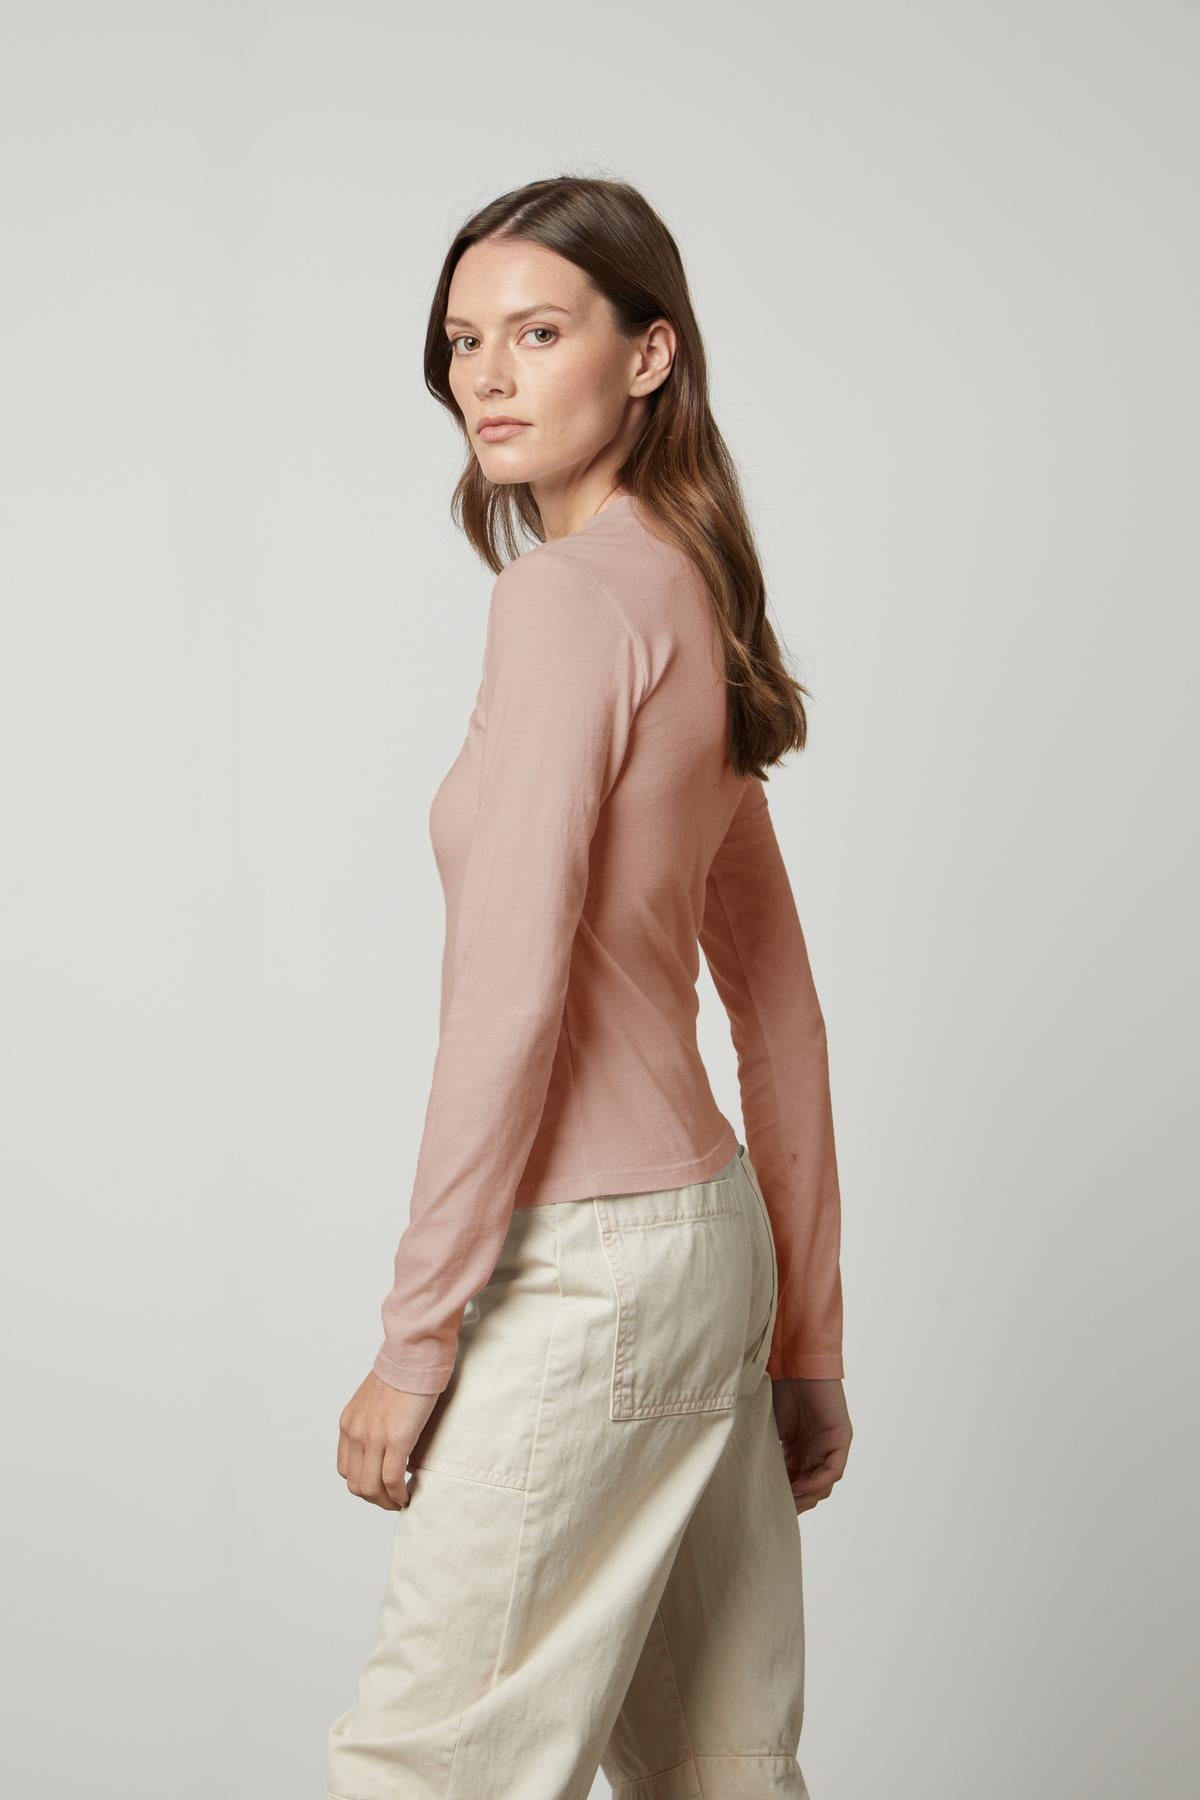 The model is wearing a LINNY MOCK NECK TEE by Velvet by Graham & Spencer, creating a flattering silhouette.-35660506824897